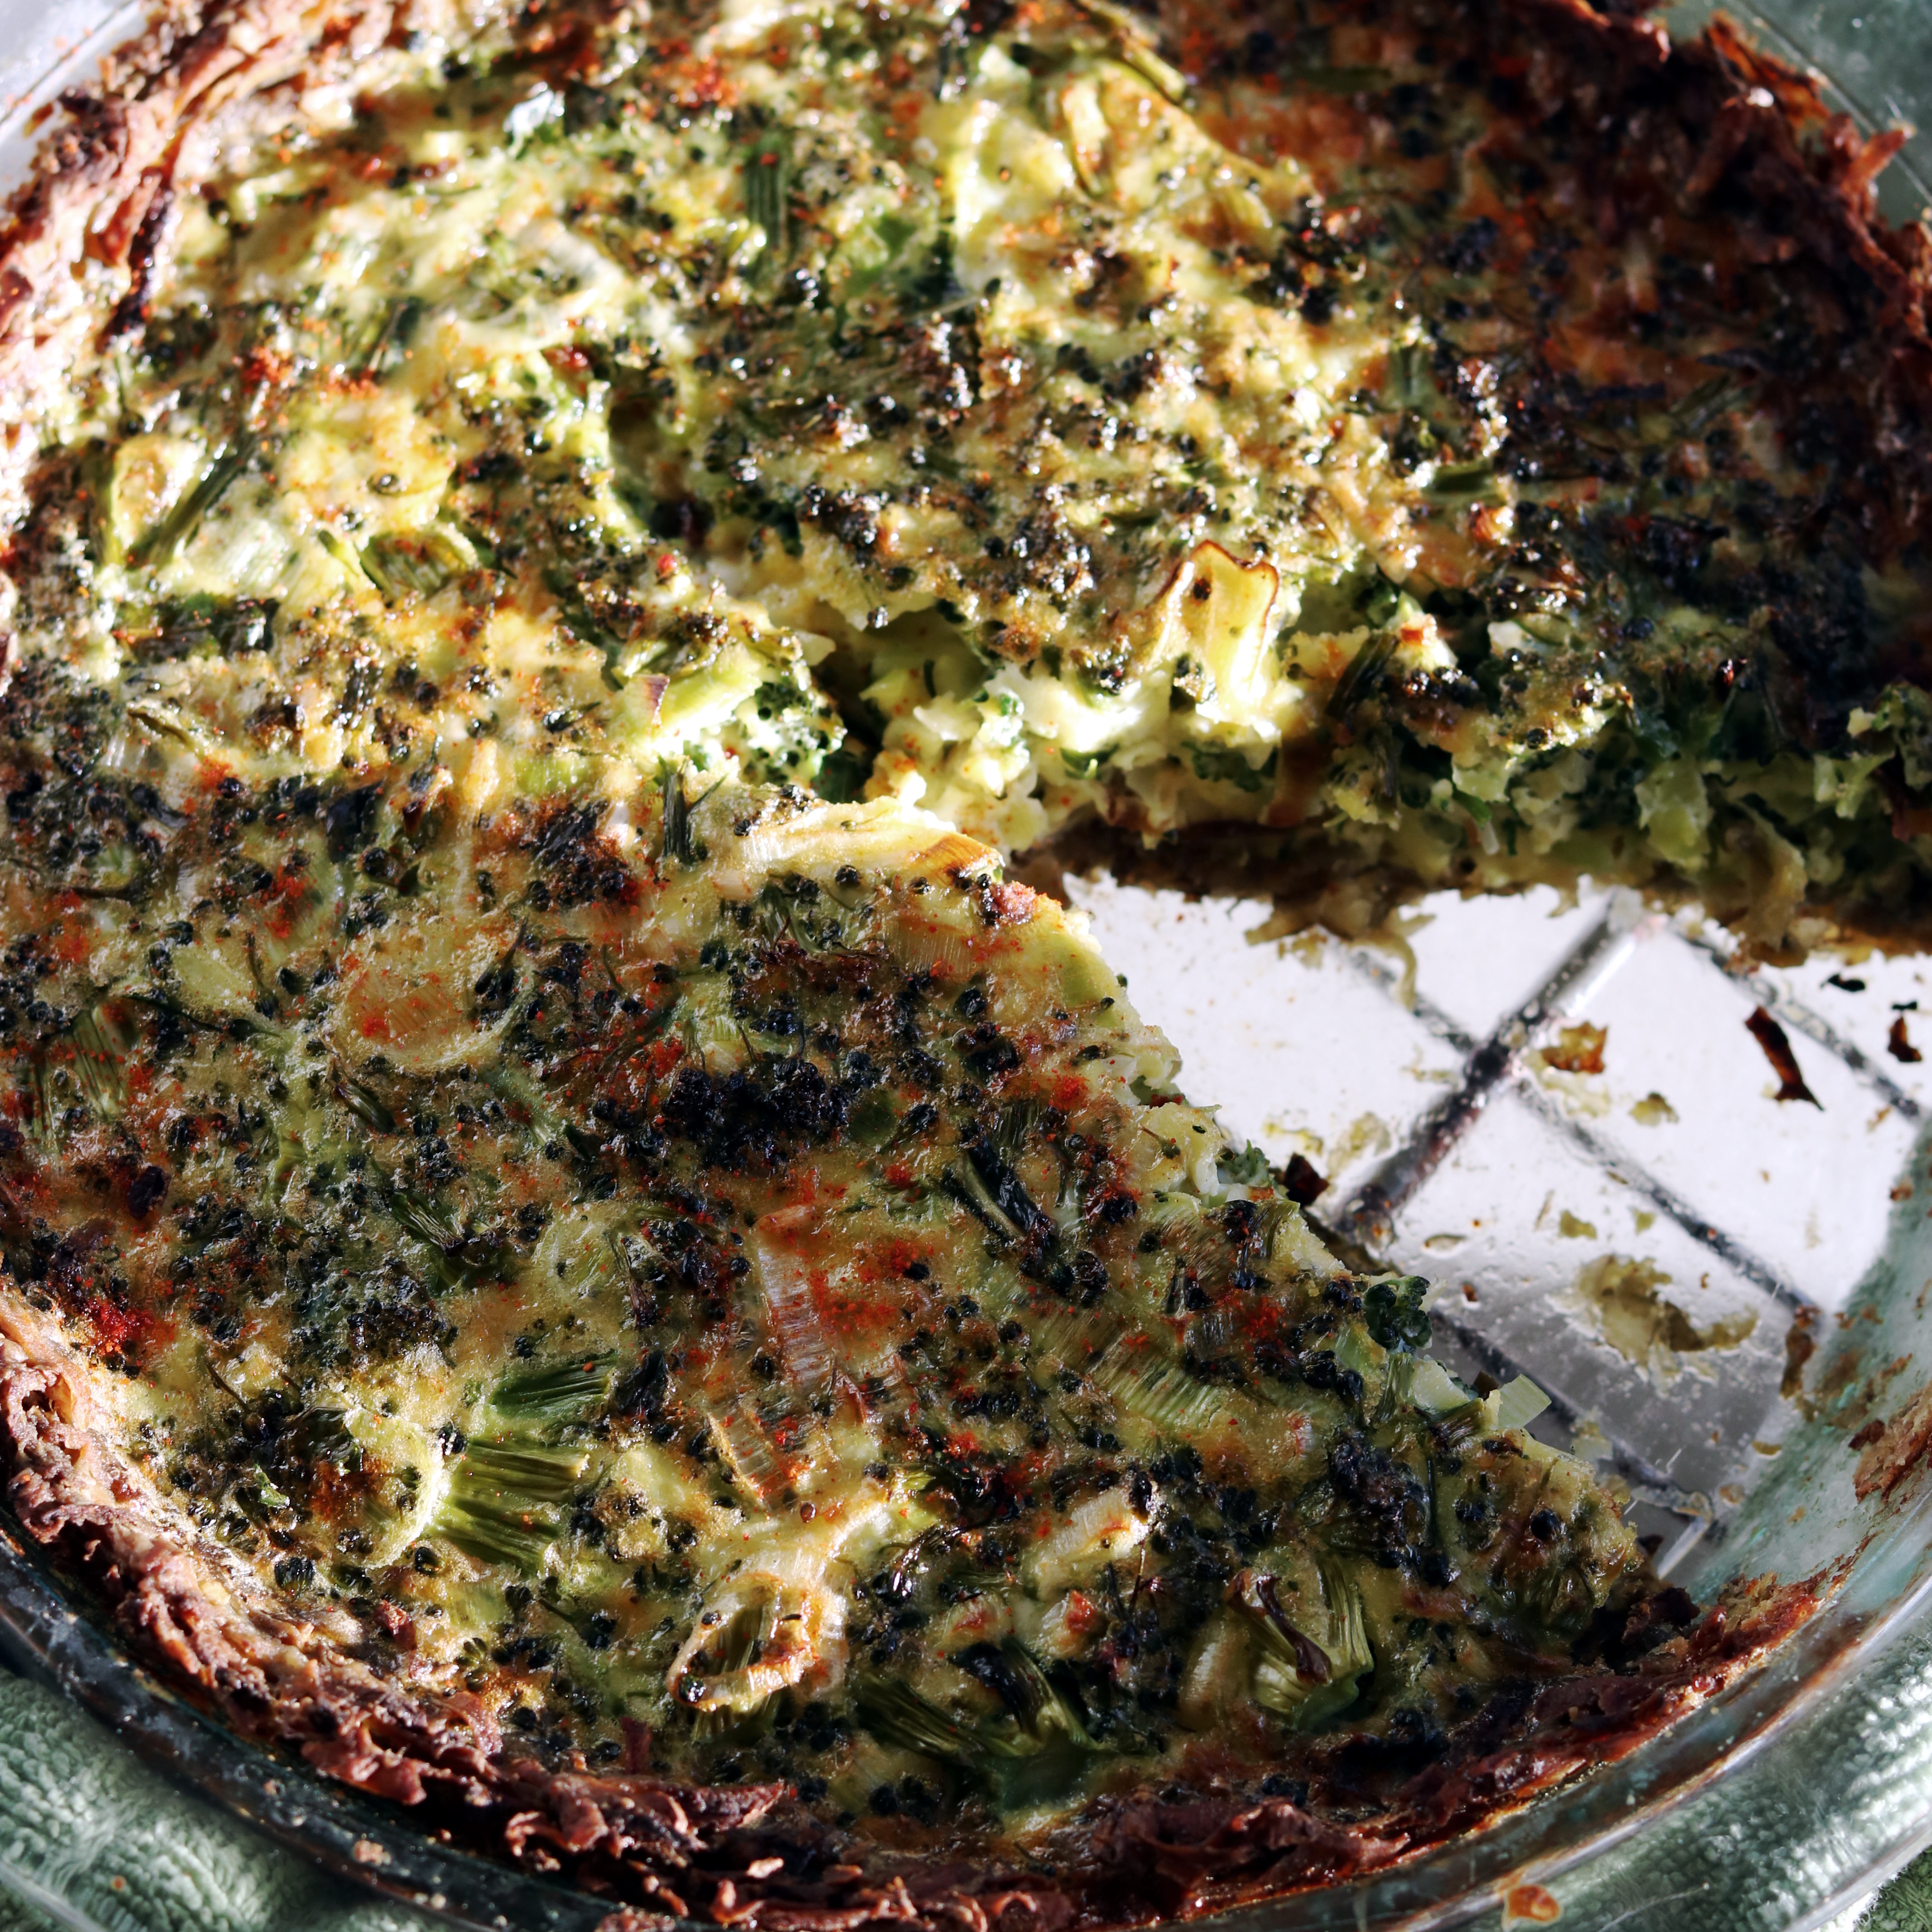 No Easter brunch is complete without an Easter quiche. If you've never had a vegetarian quiche with a vegetable crust you are in for a guilt free treat!